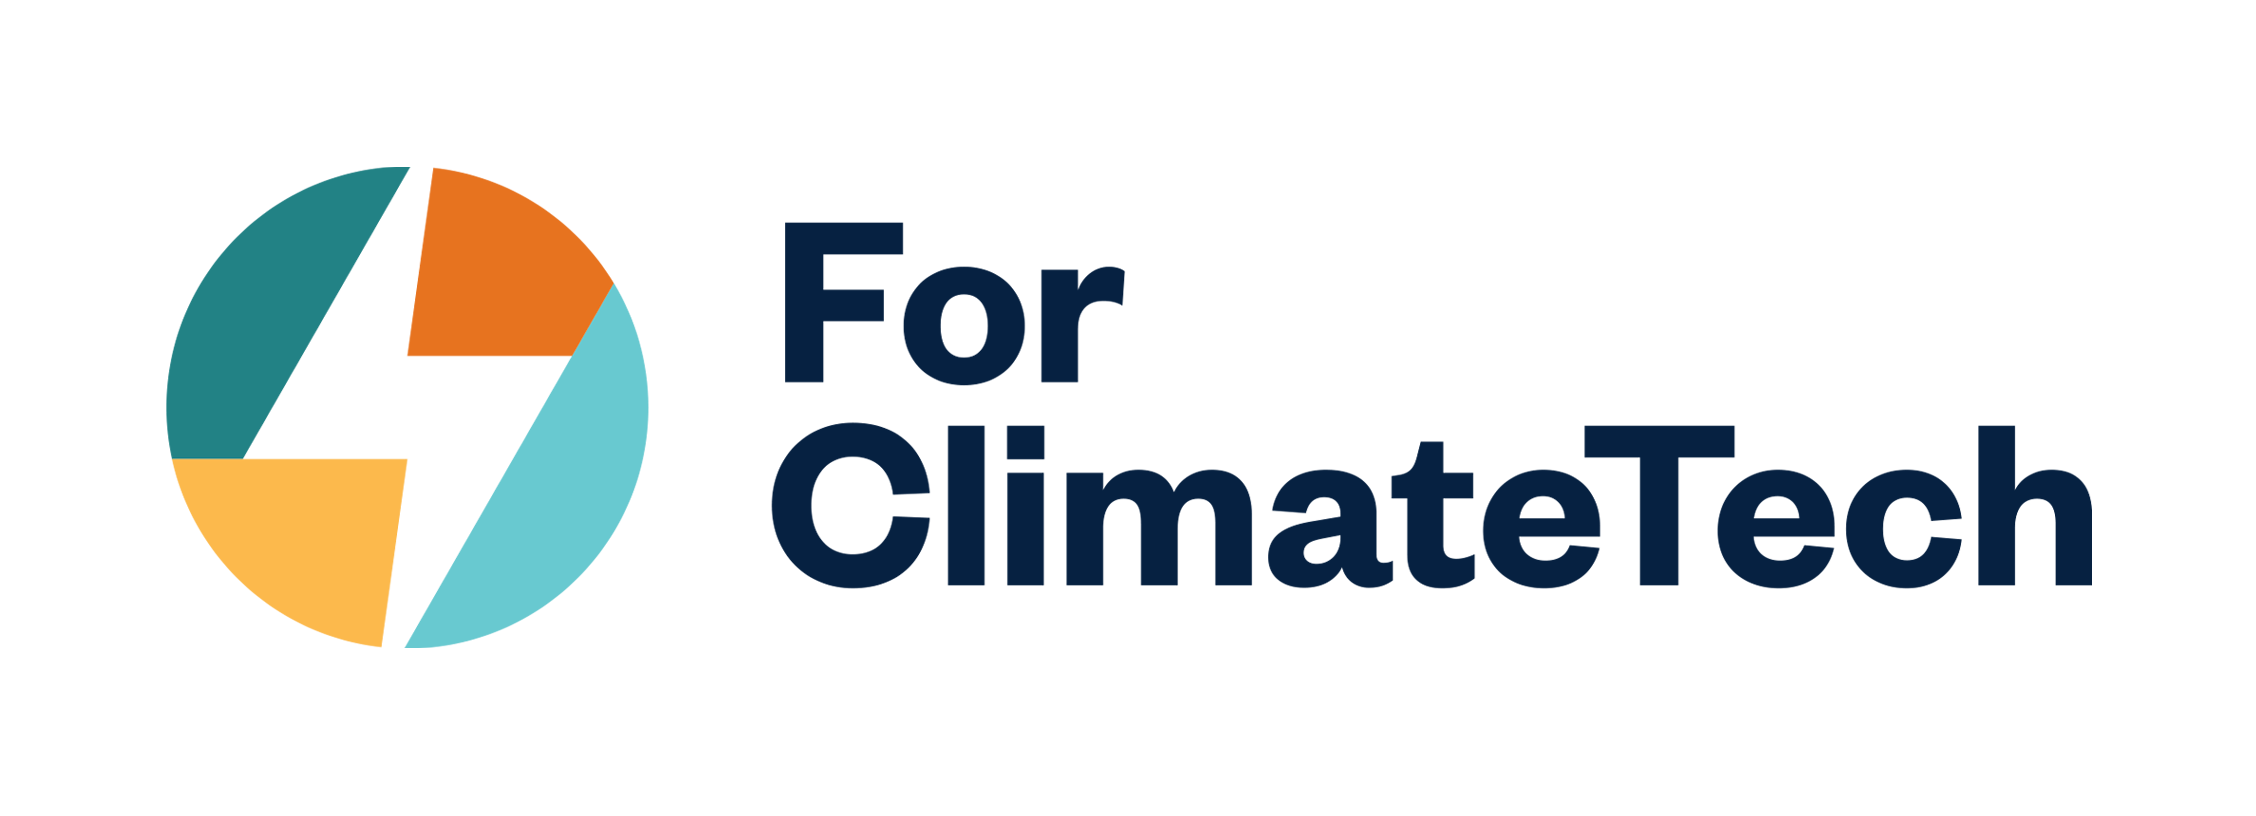 Copy of ForClimateTech_Logo_Full-colour_RGB